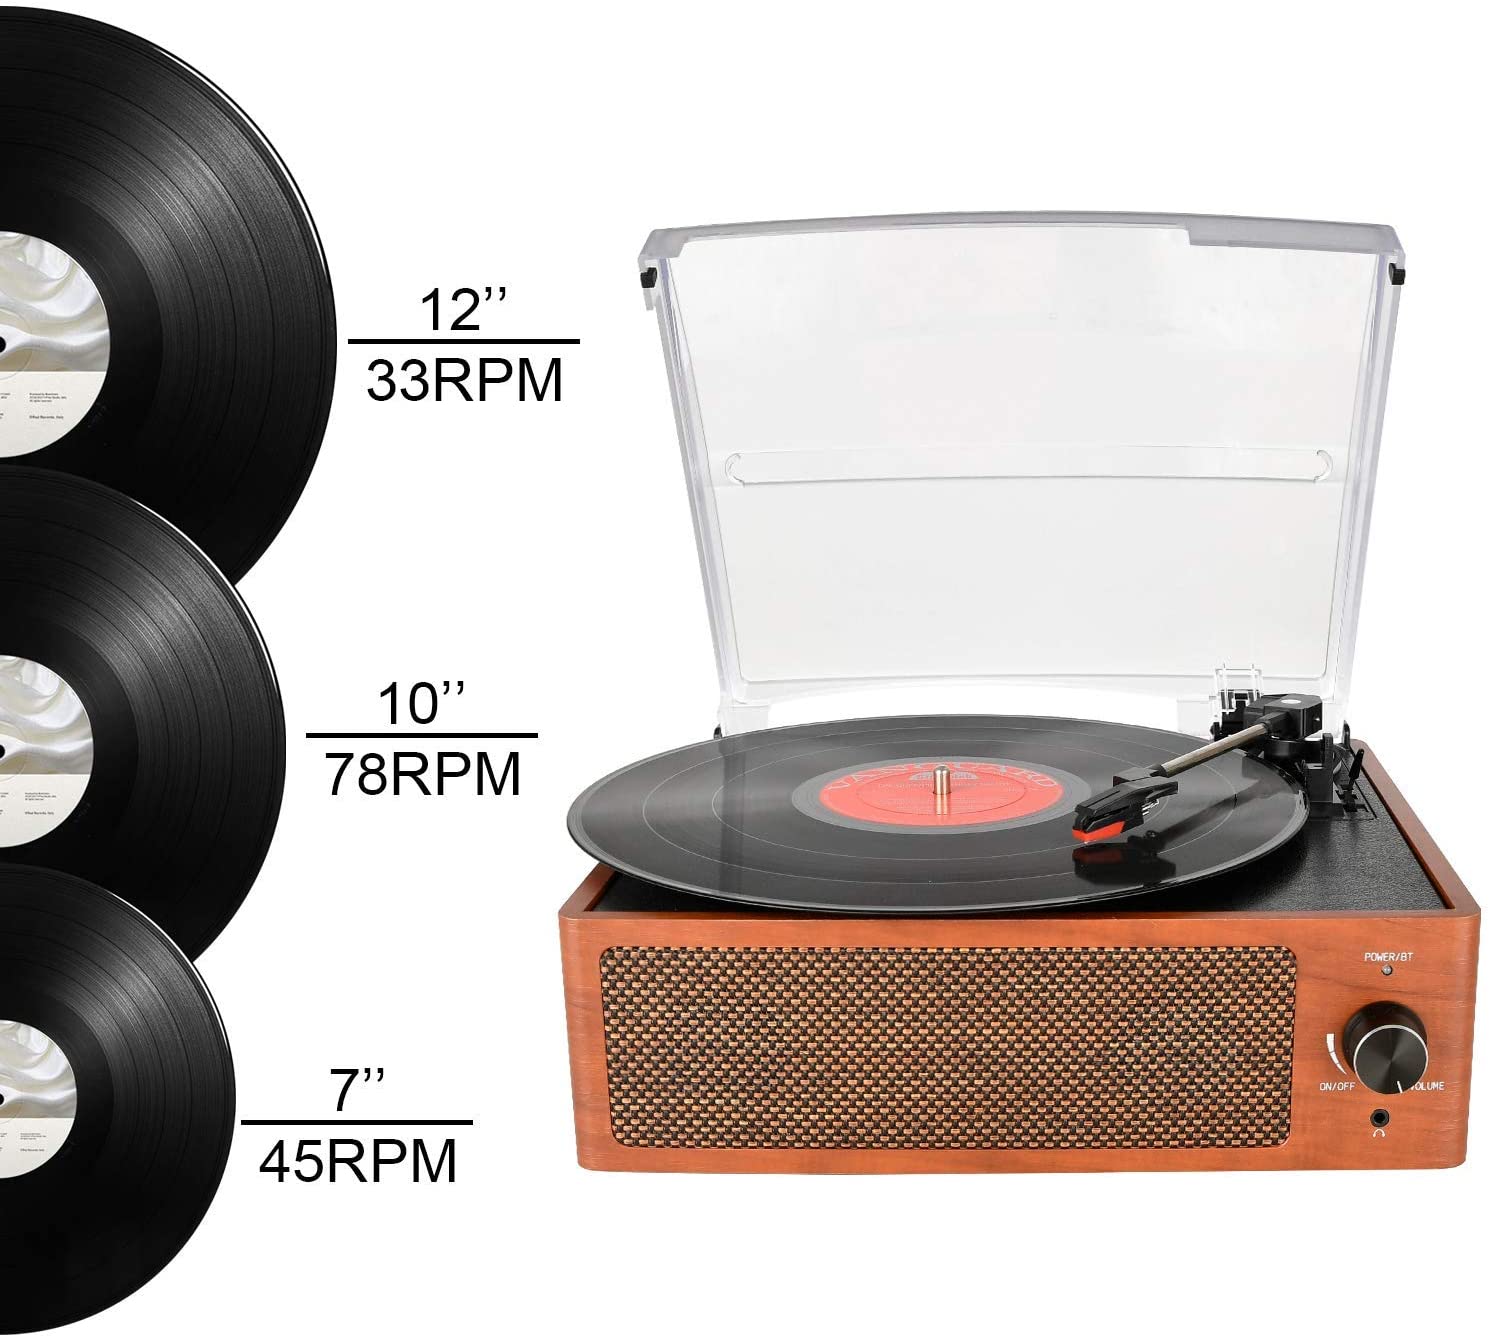 DIGITNOW Bluetooth Record Player Belt-Driven 3-Speed Turntable